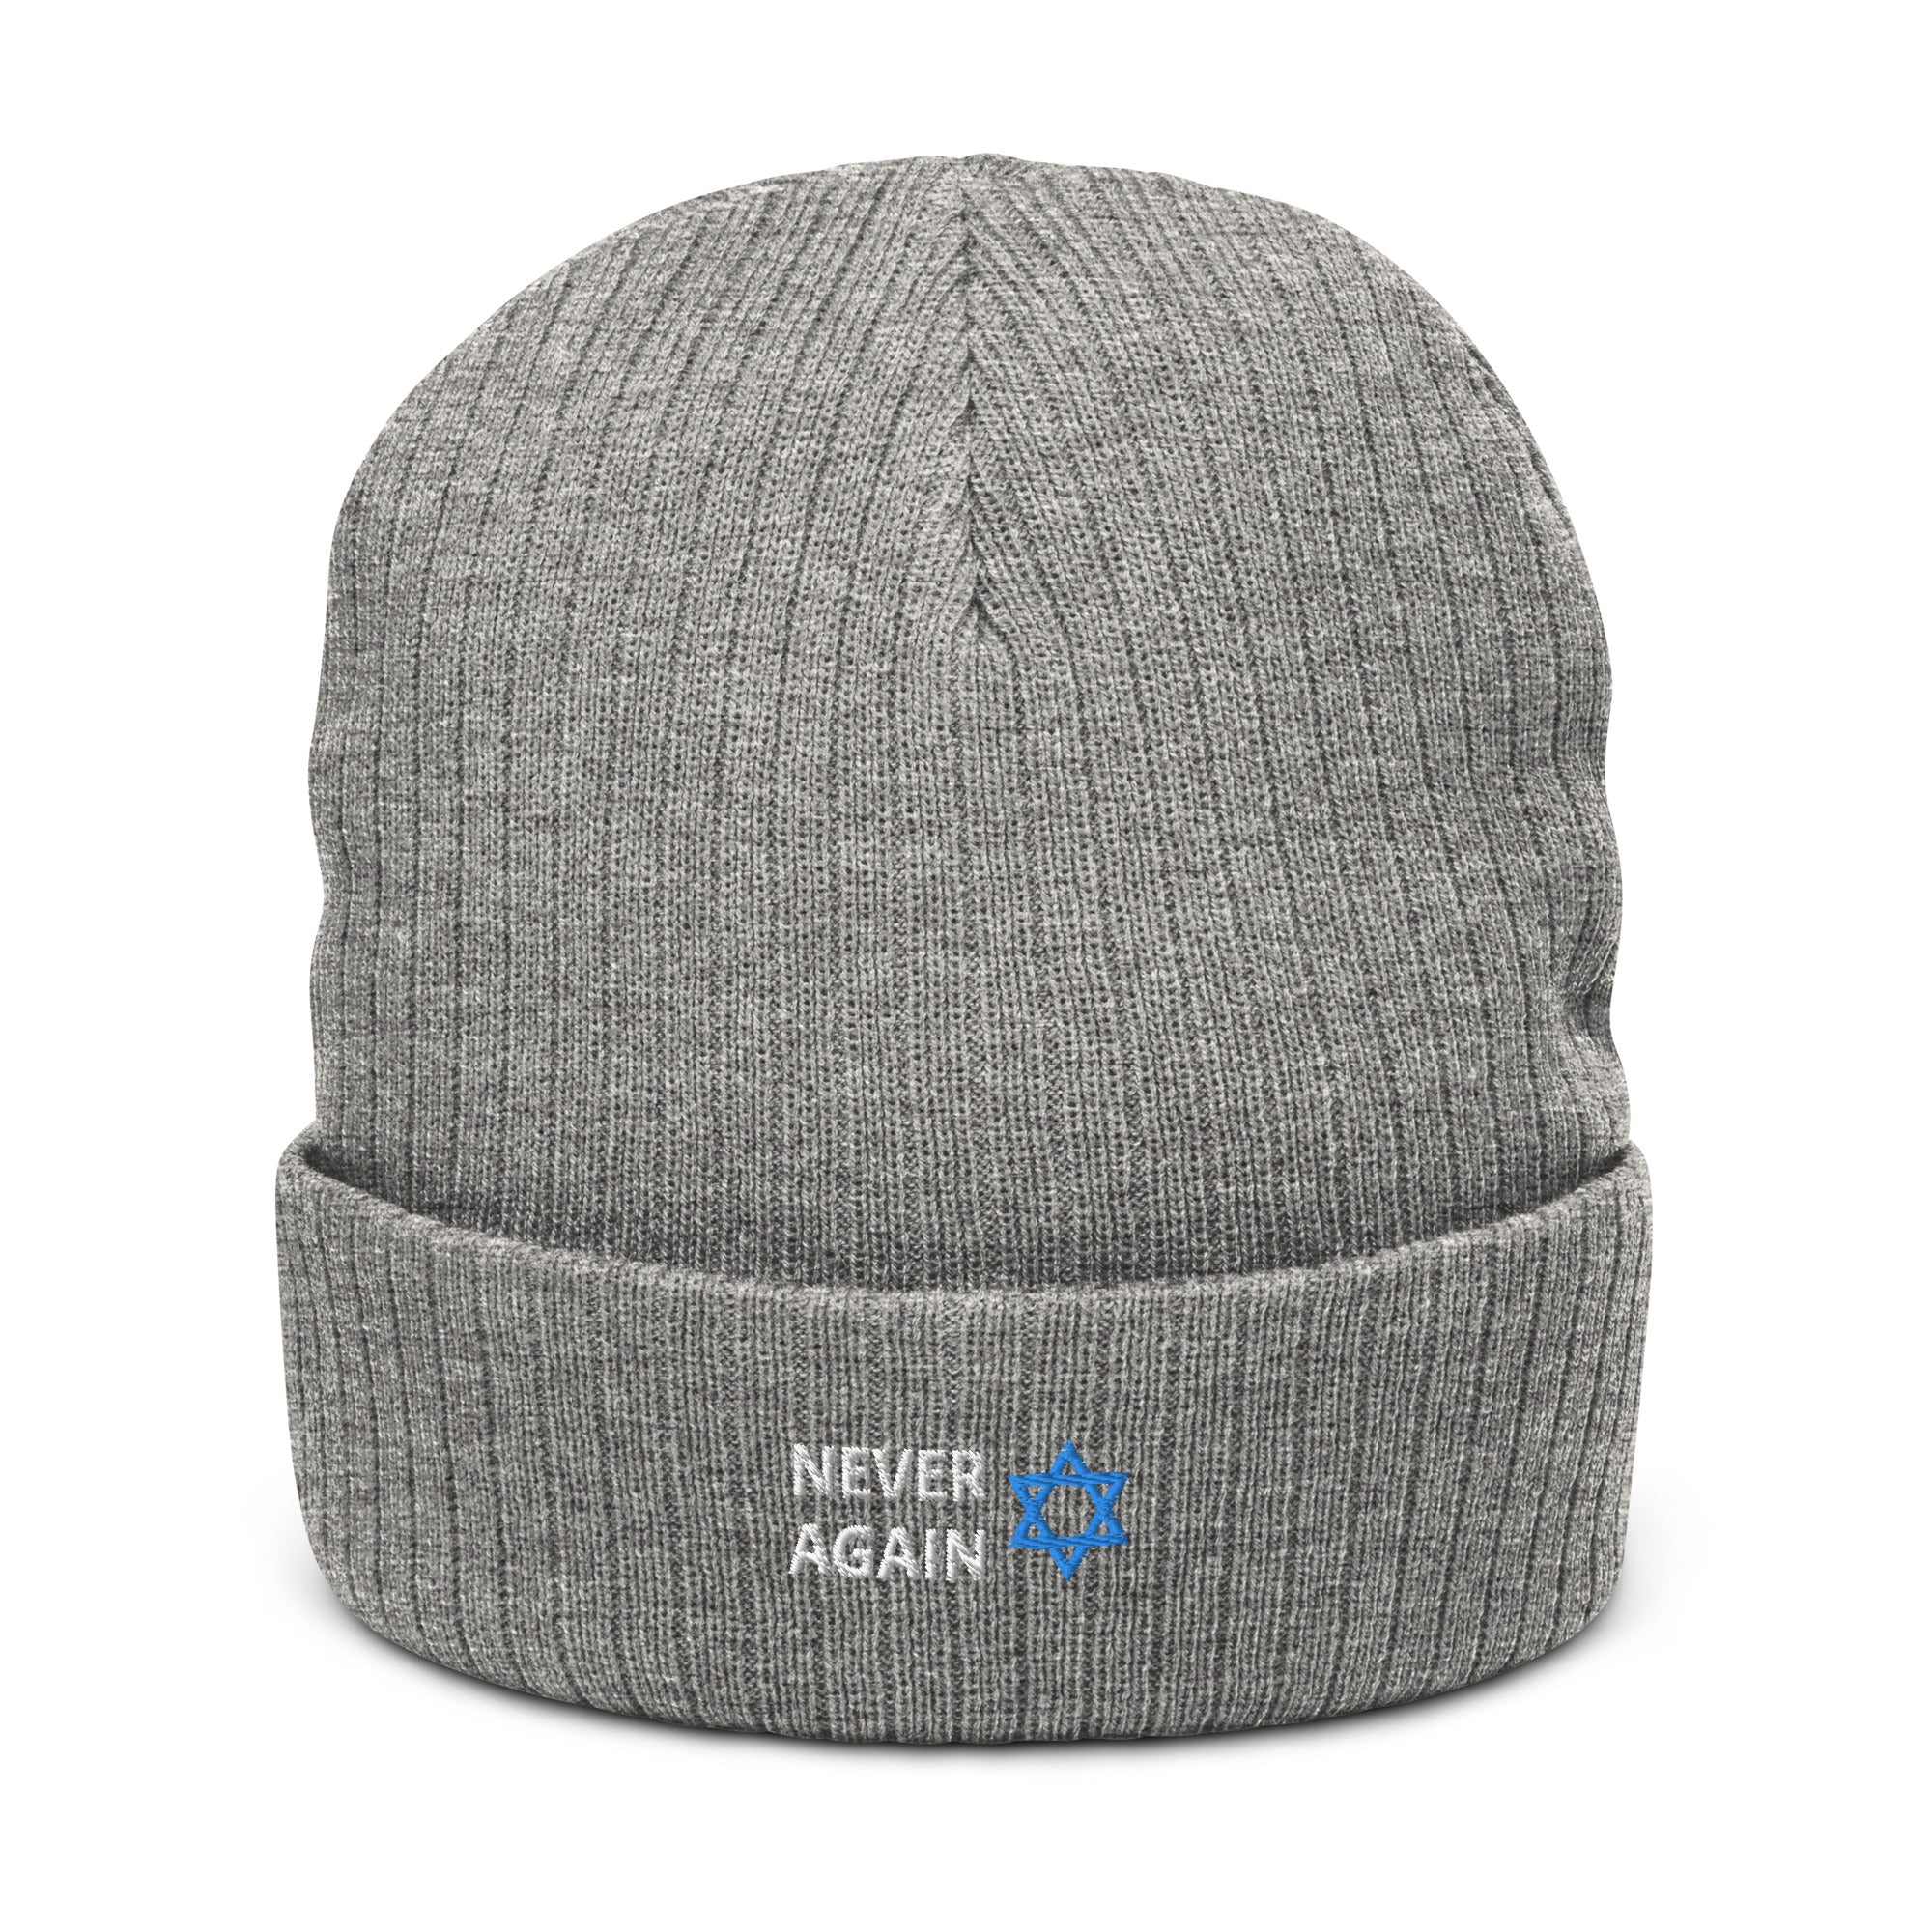 Never Again - Ribbed knit beanie